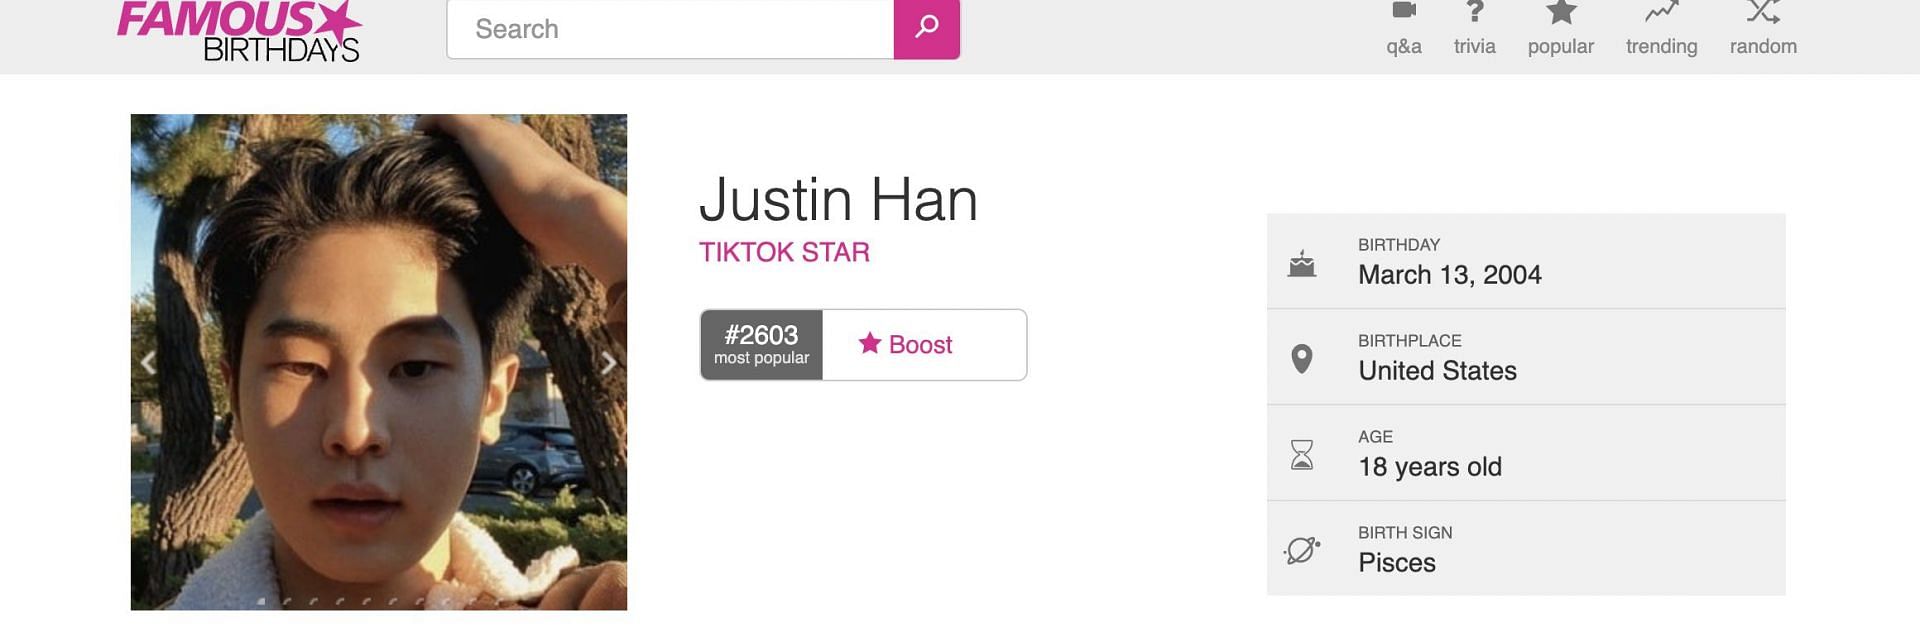 Famousbirthdays.com claims that Justin is 18 years old at the moment. (Image via Famous Birthdays)